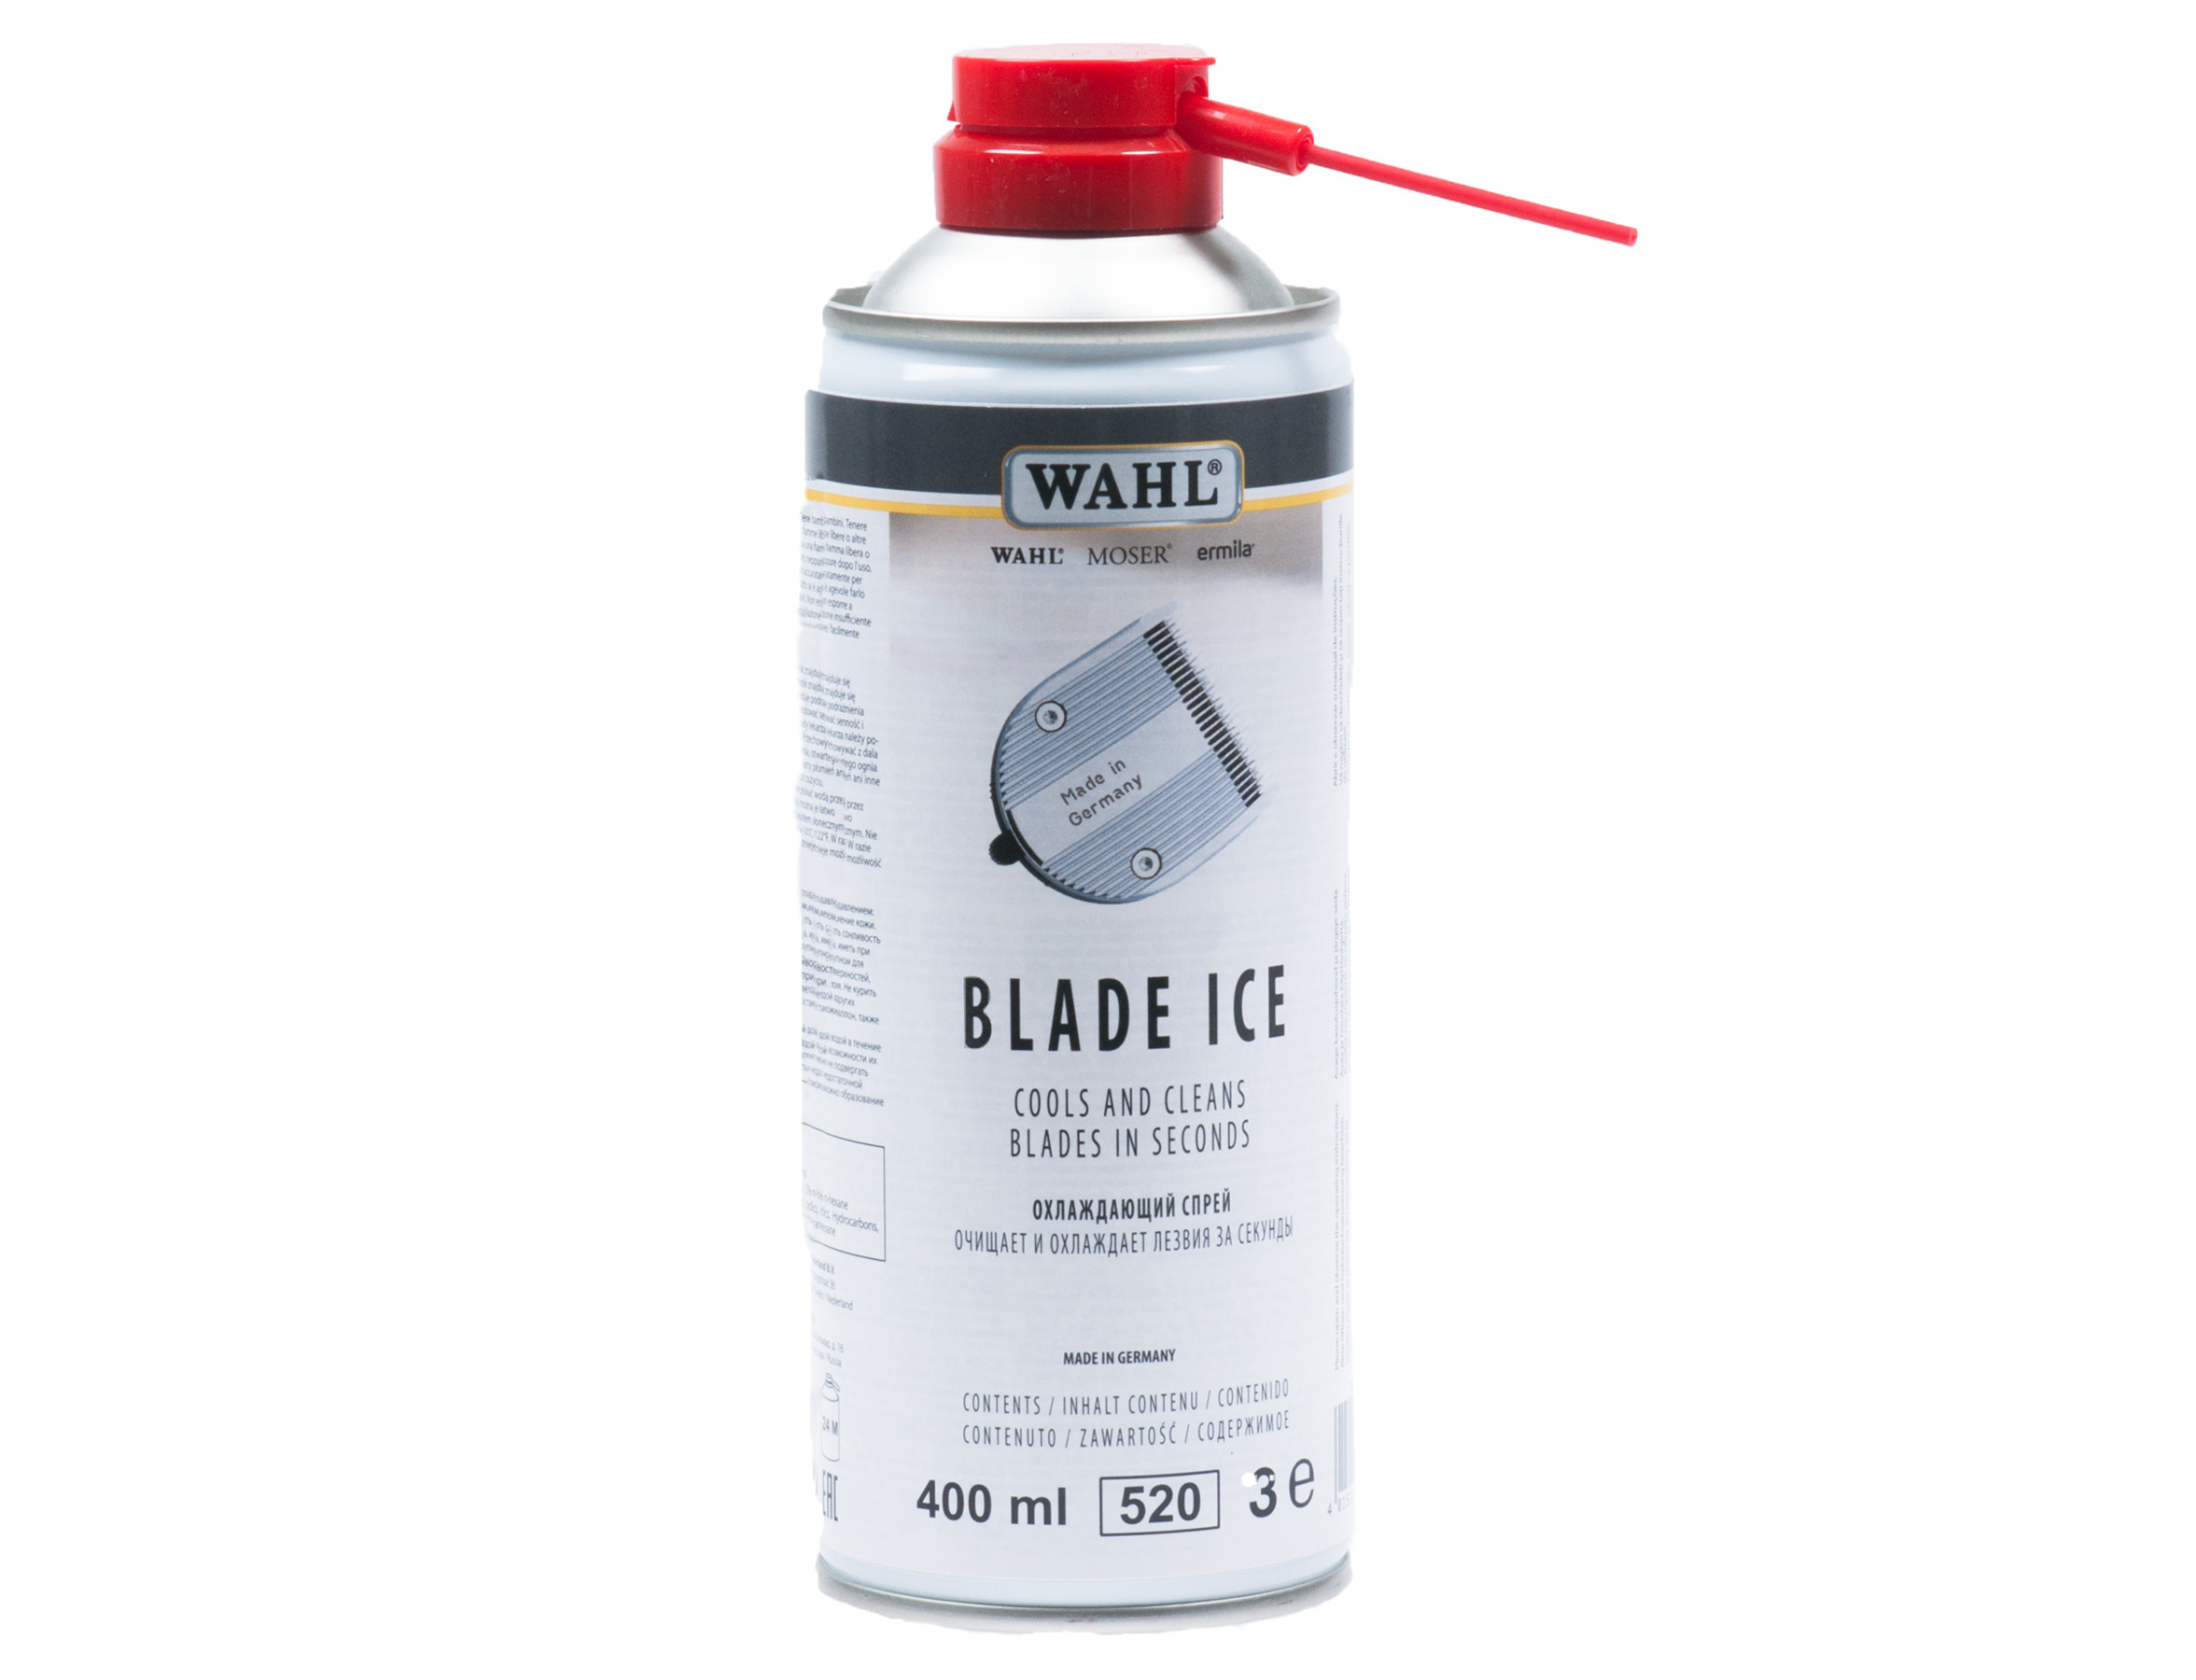 blade ice wahl